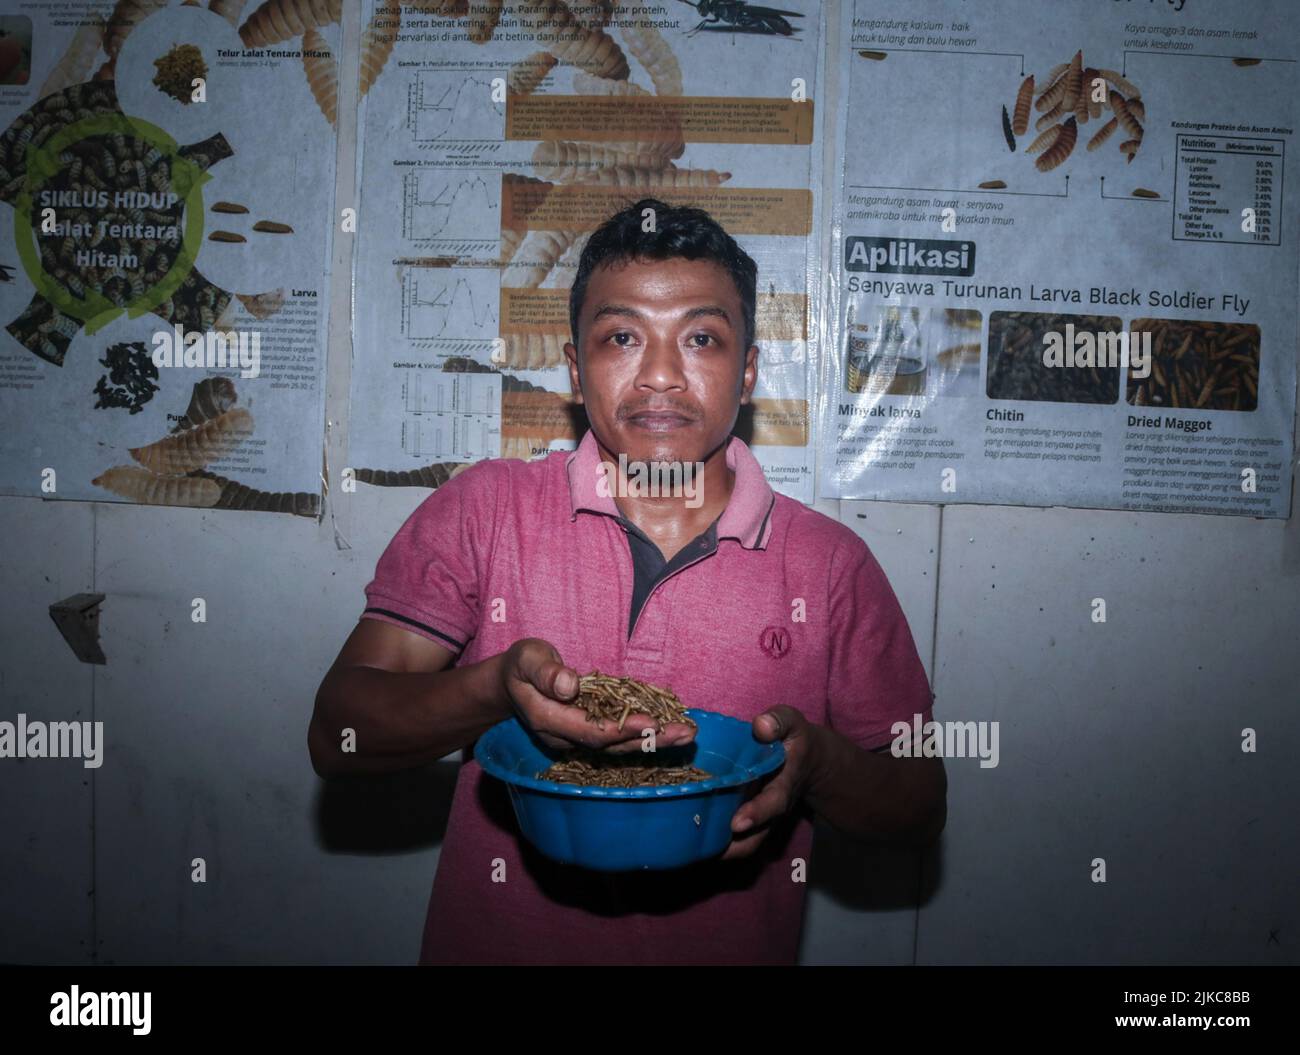 August 1, 2022, Banyuwangi, East Java, Indonesia: Ilham (29 years) show maggot from kitchen waste and organic waste in Siliragung village, Banyuwangi, East Java, Indonesia, on August 1, 2022.The farming maggot is produced from kitchen waste from a mining company and traditional market waste around. In 1 month it produces 100 kilograms. It sells for (wet maggot) USD 0, 28/ kilograms and (dry maggot) for USD 5, 47/kilograms. In addition, they produce compost for USD 2, 36/25 kilograms and soil fertilizer booster for USD 0, 47/kilograms .Maggot BSF (Black Soldier Fly) is the larva of a large blac Stock Photo